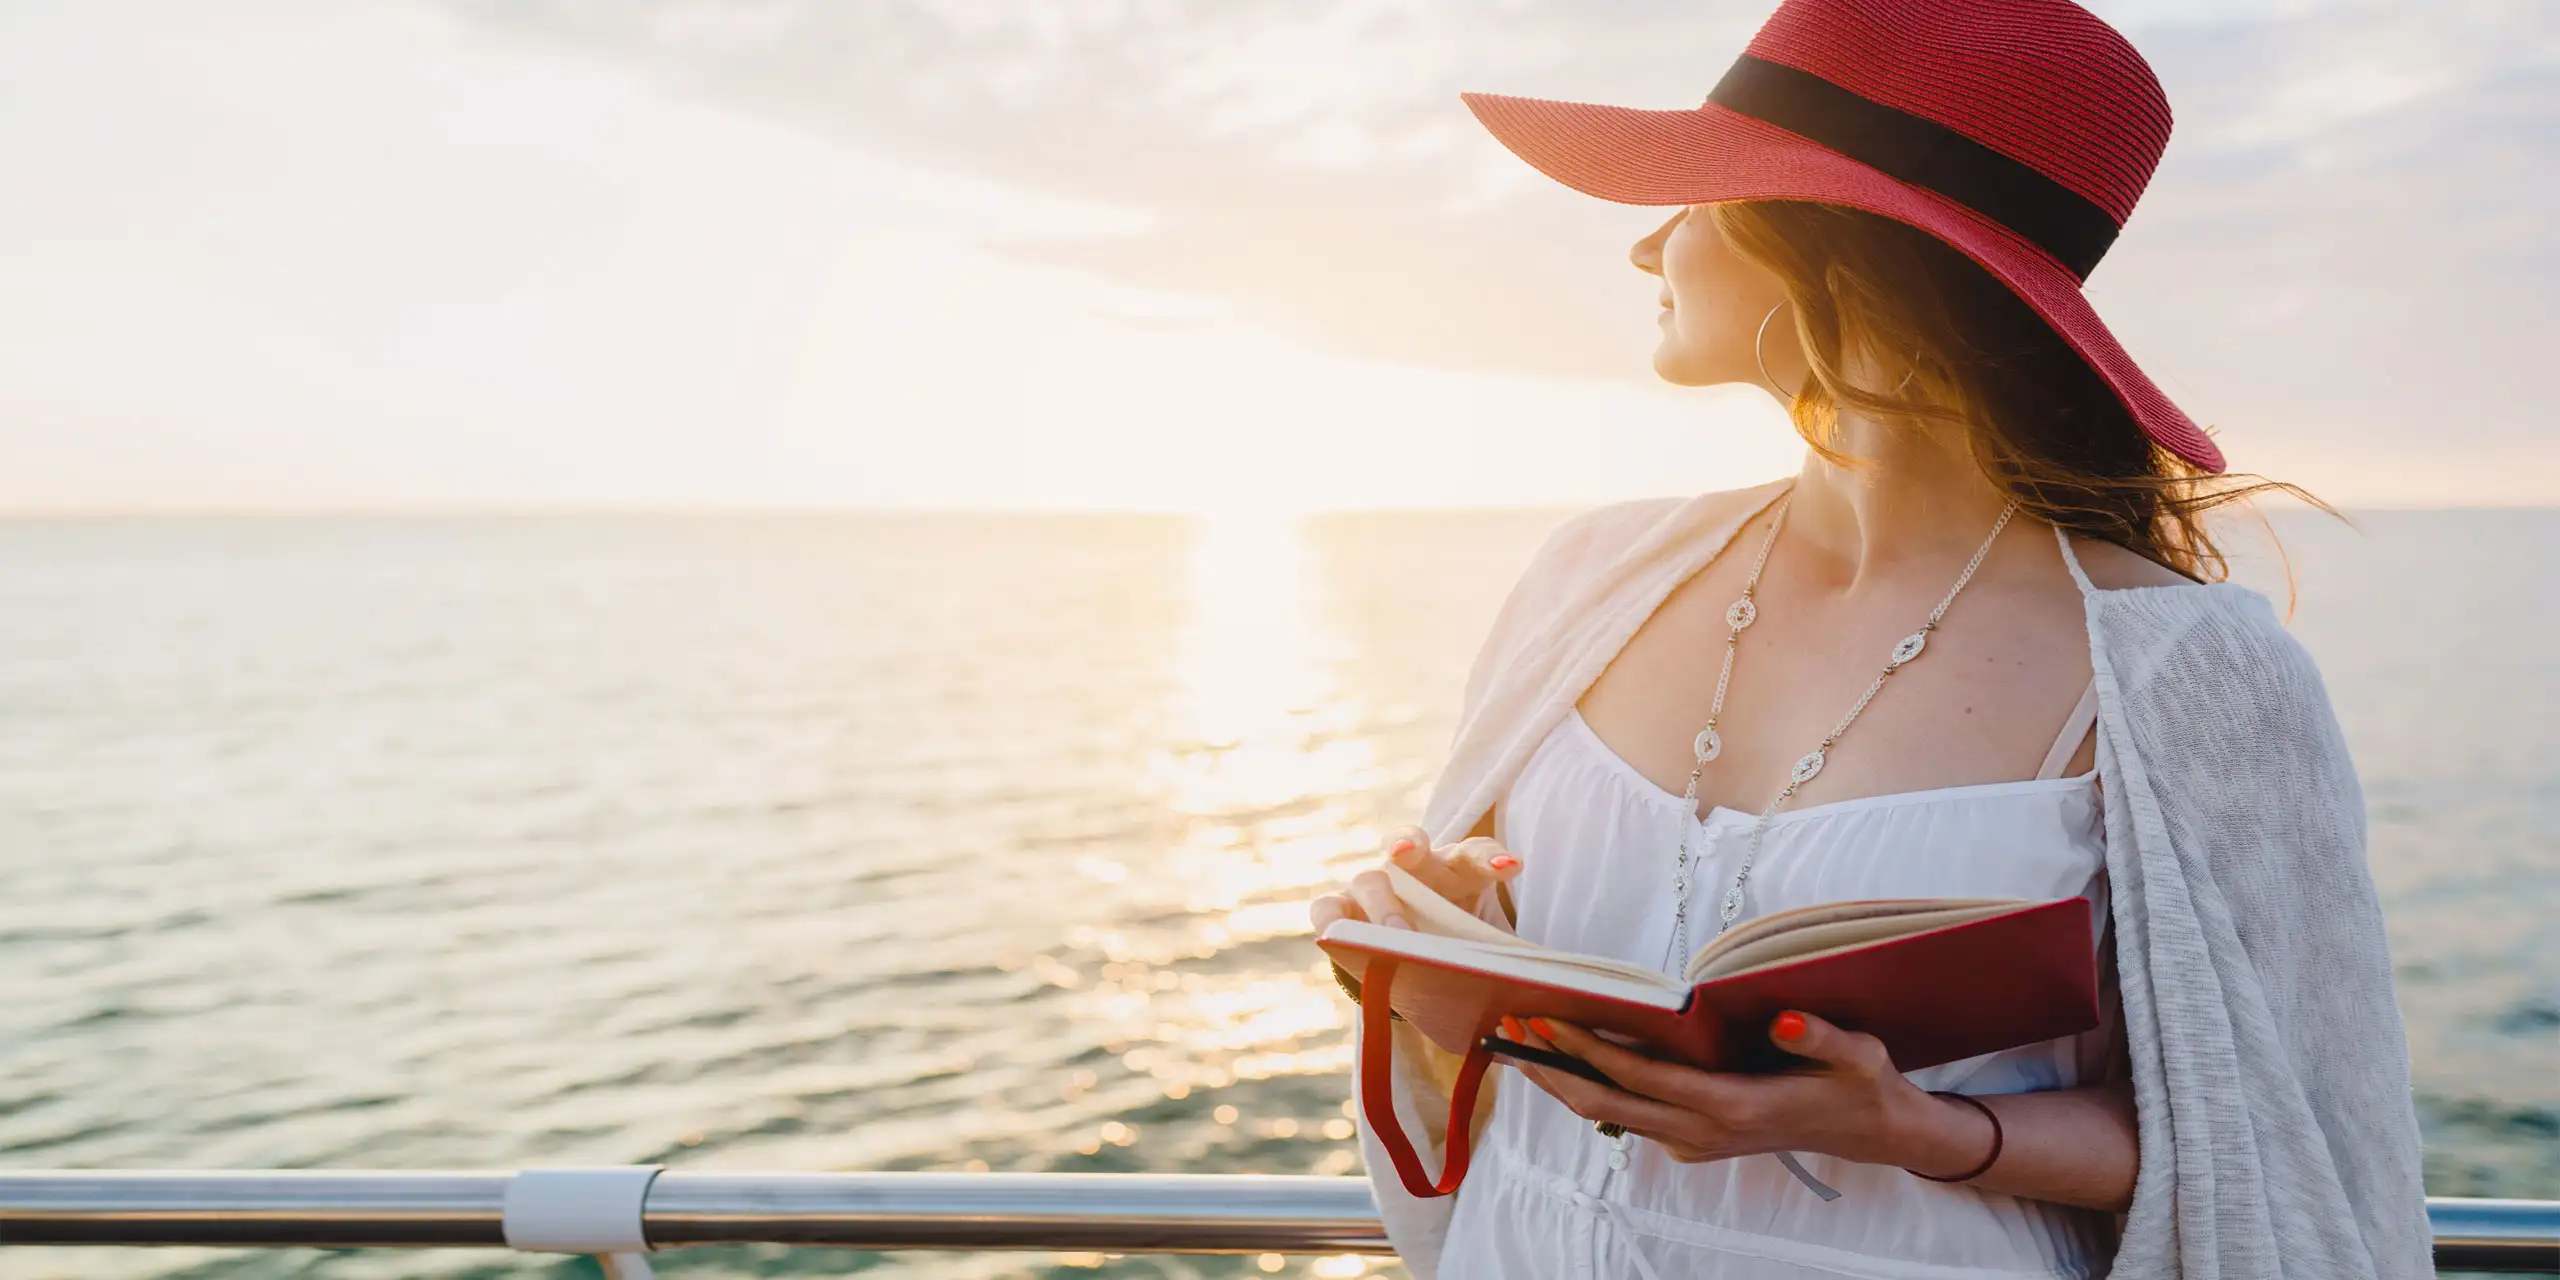 Reading On A Cruise; Courtesy of MRProduction/Shutterstock.com